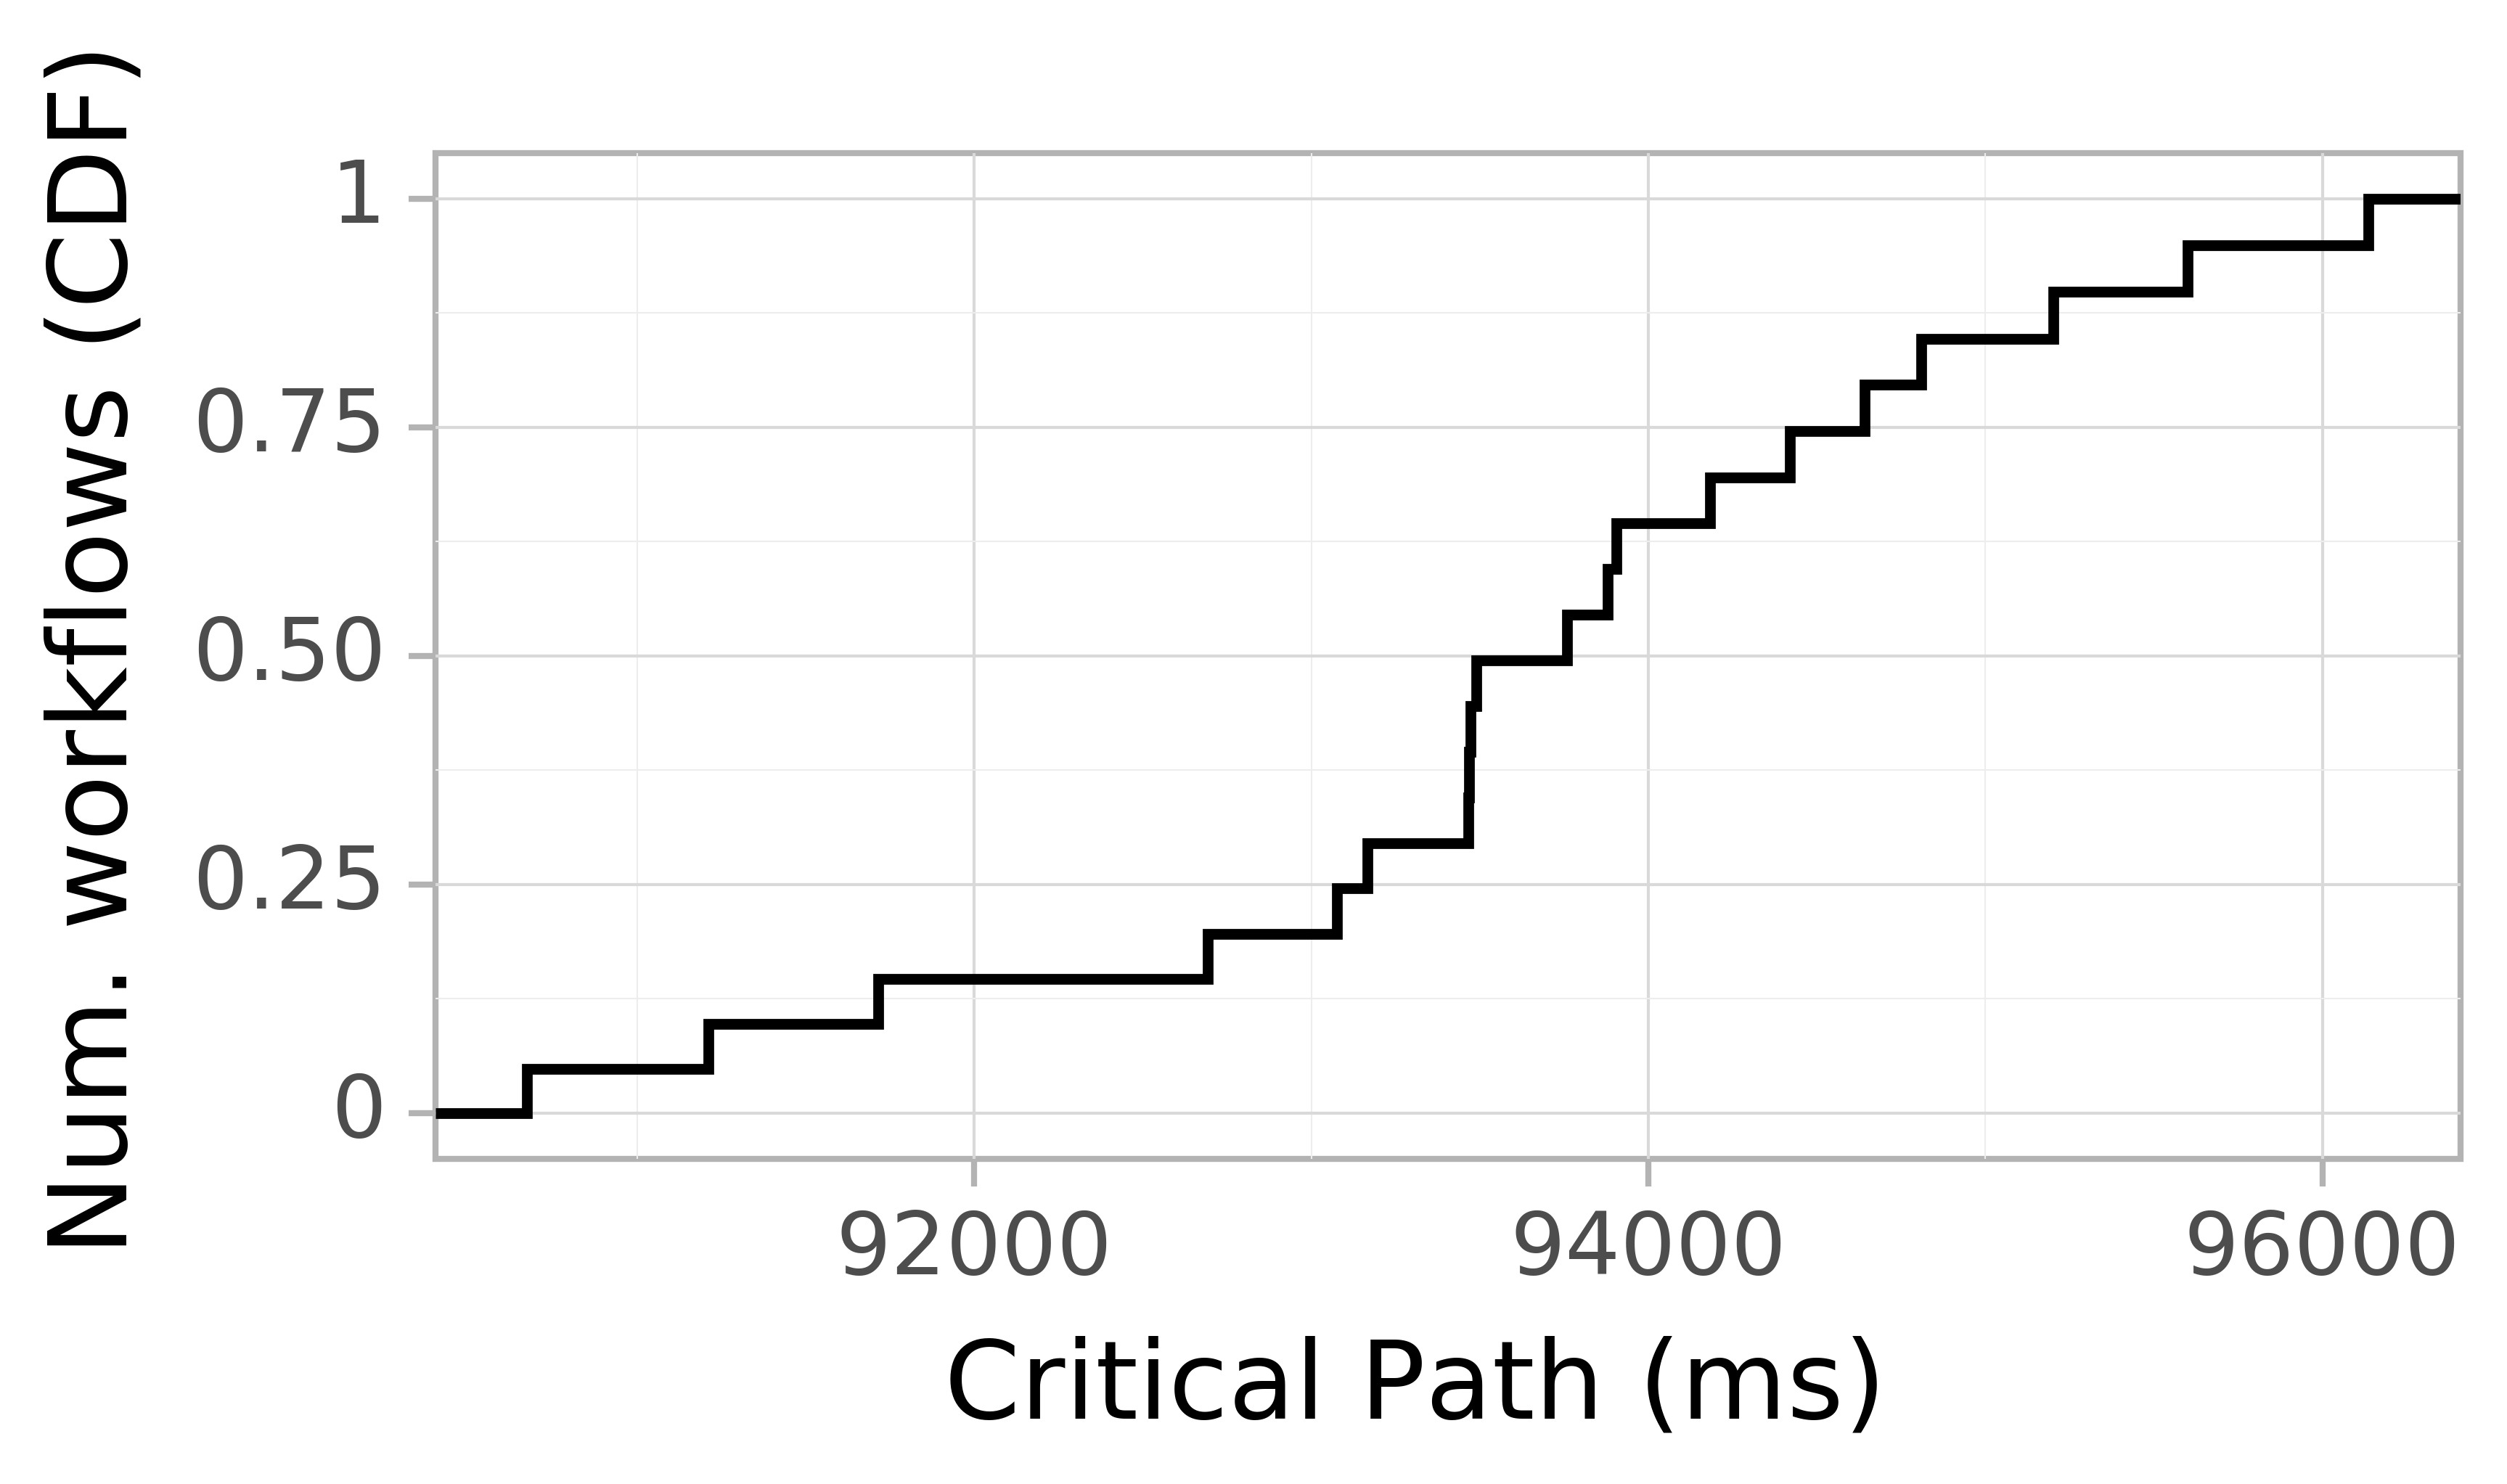 Job runtime CDF graph for the askalon-new_ee13 trace.